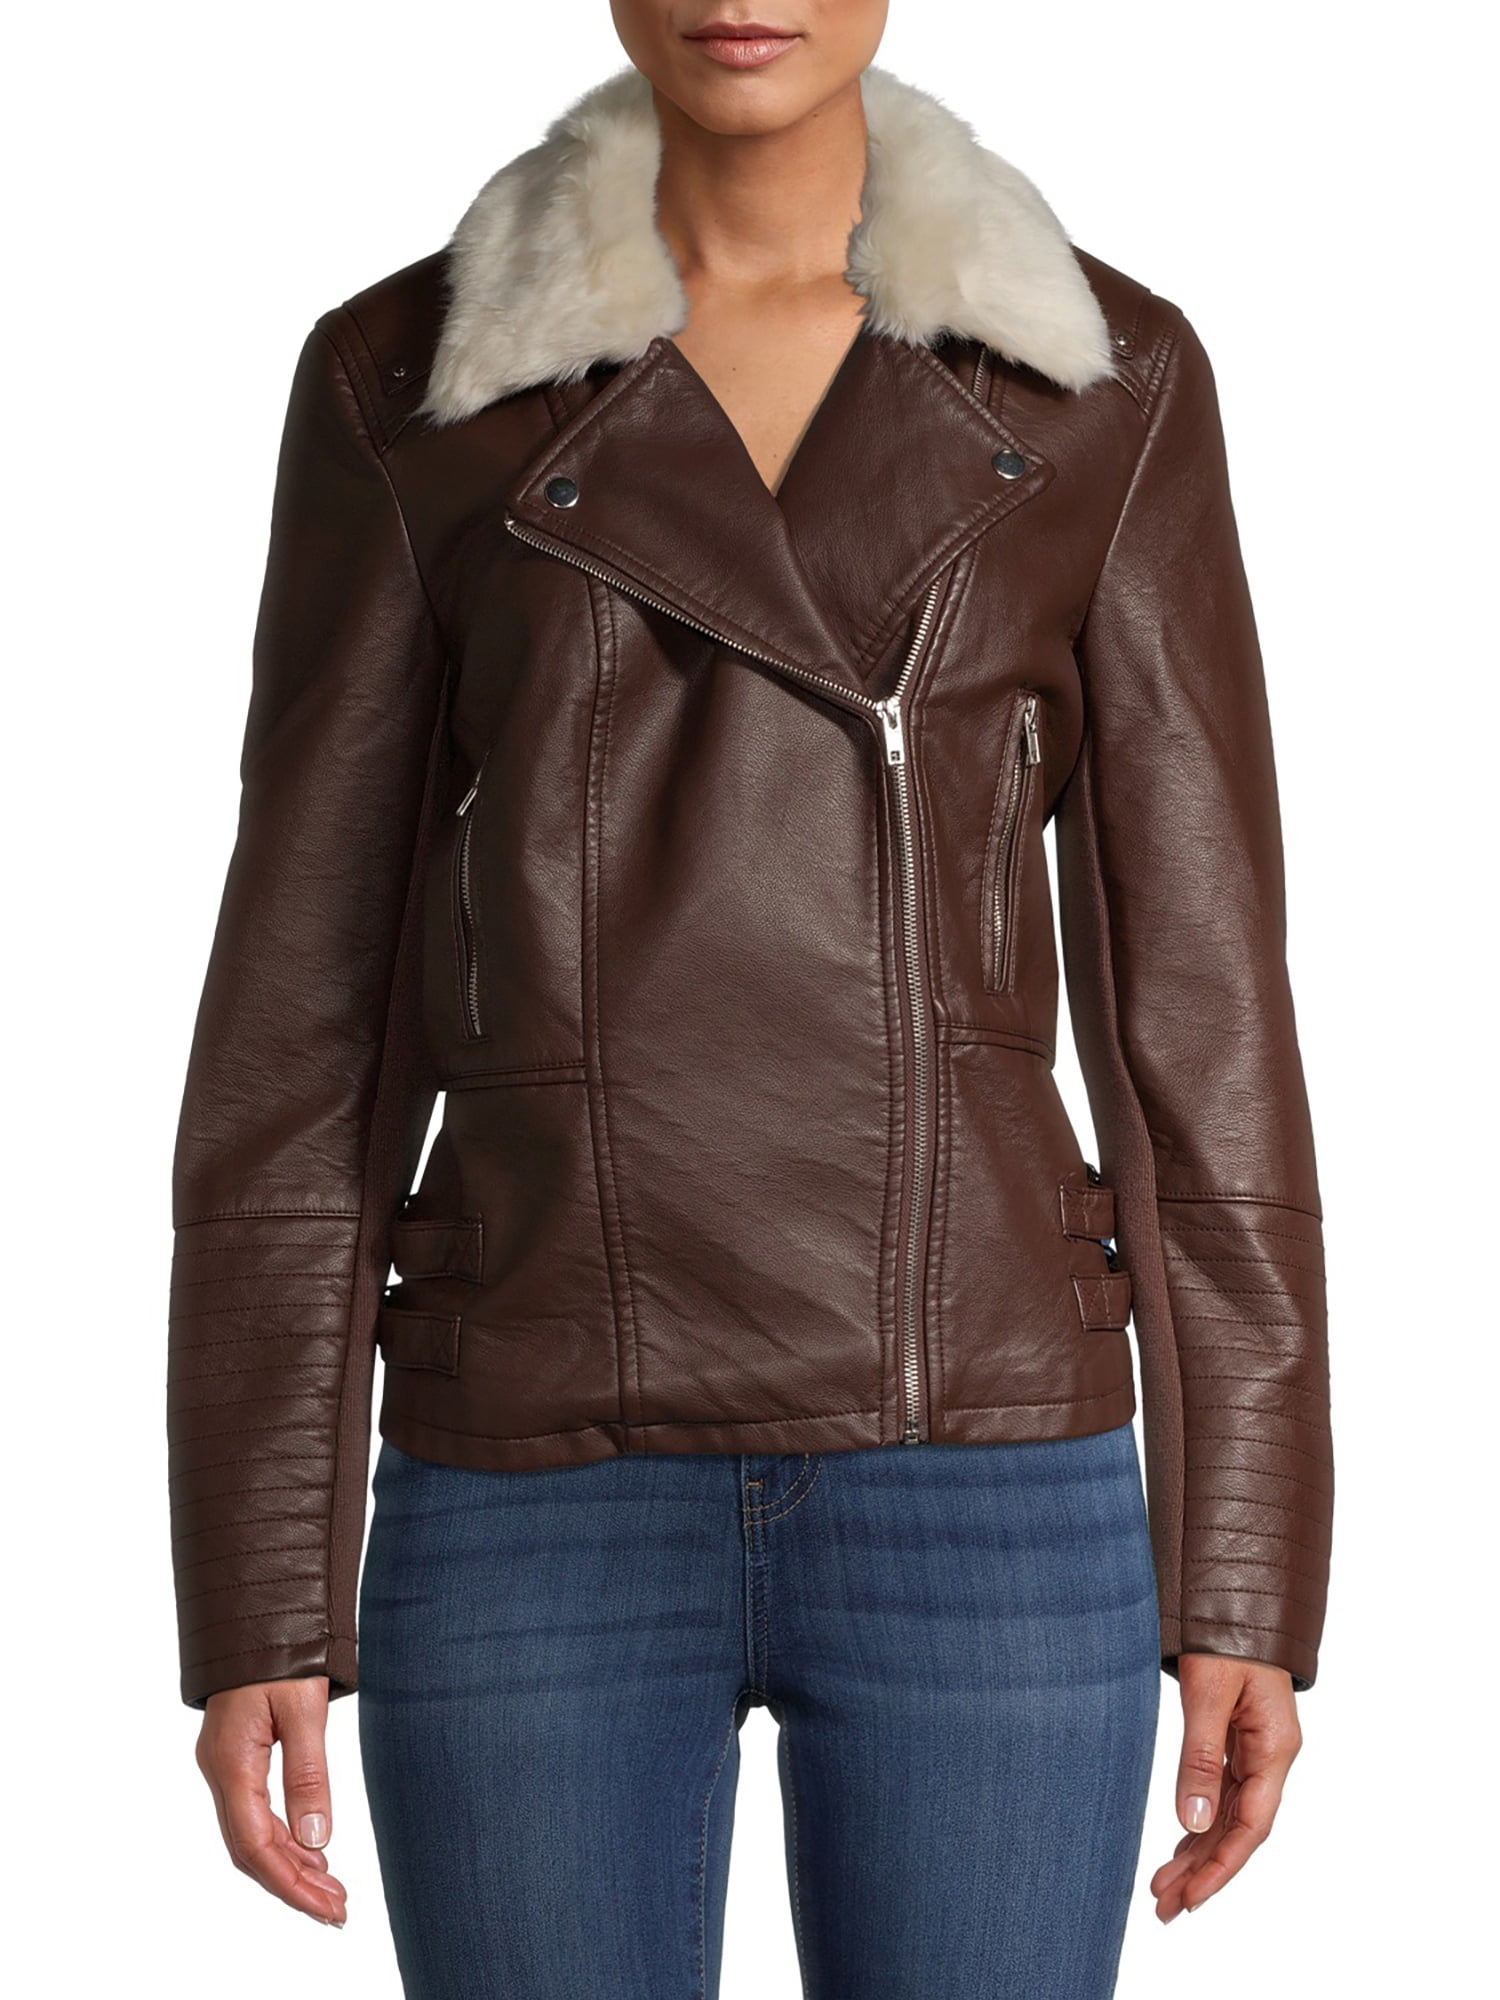 Mark Alan Women’s Faux Leather Moto Jacket with Faux Fur Collar ...